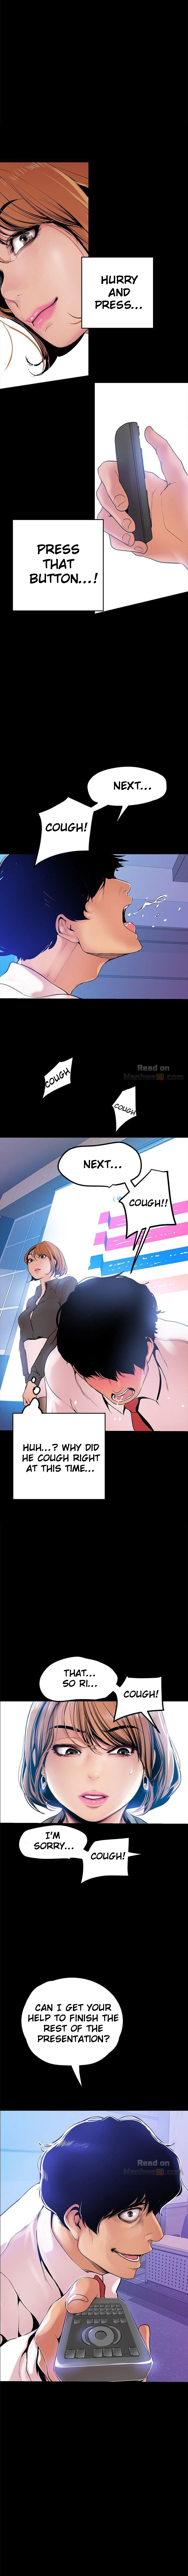 Panel Image 1 for chapter 28 of manhwa A Wonderful New World on read.oppai.stream